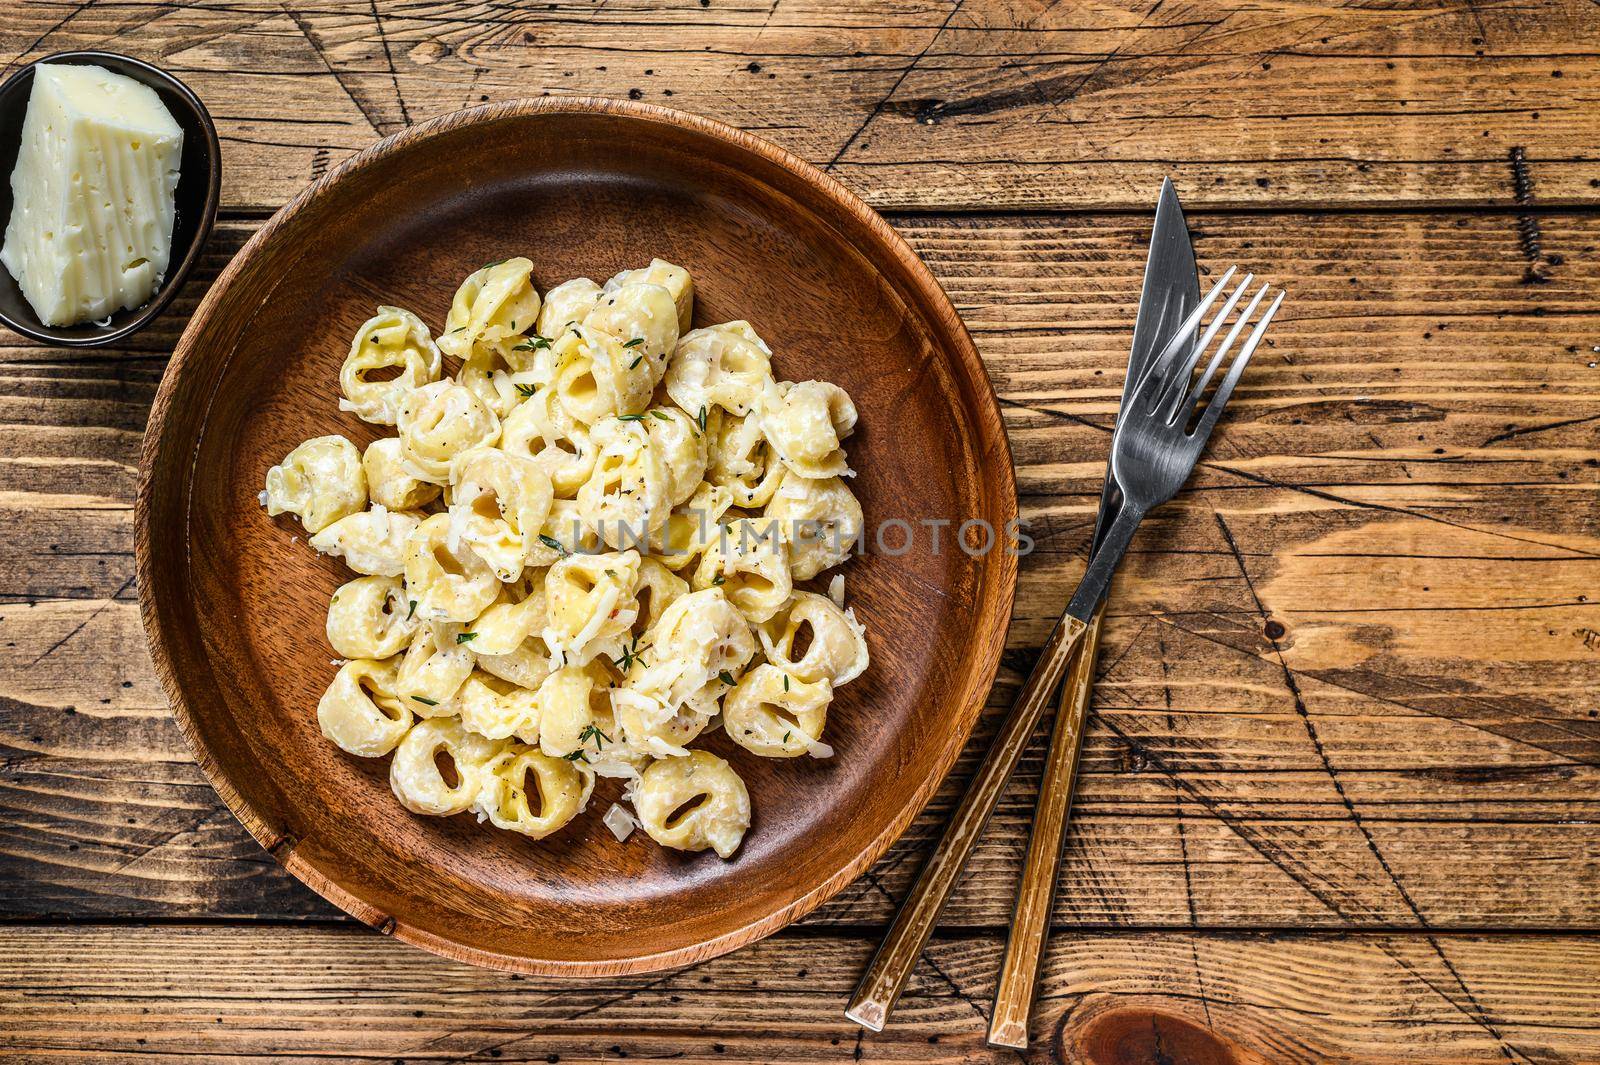 Ravioli or tortellini pasta in cream cheese sauce with meat. wooden background. Top view. Copy space.